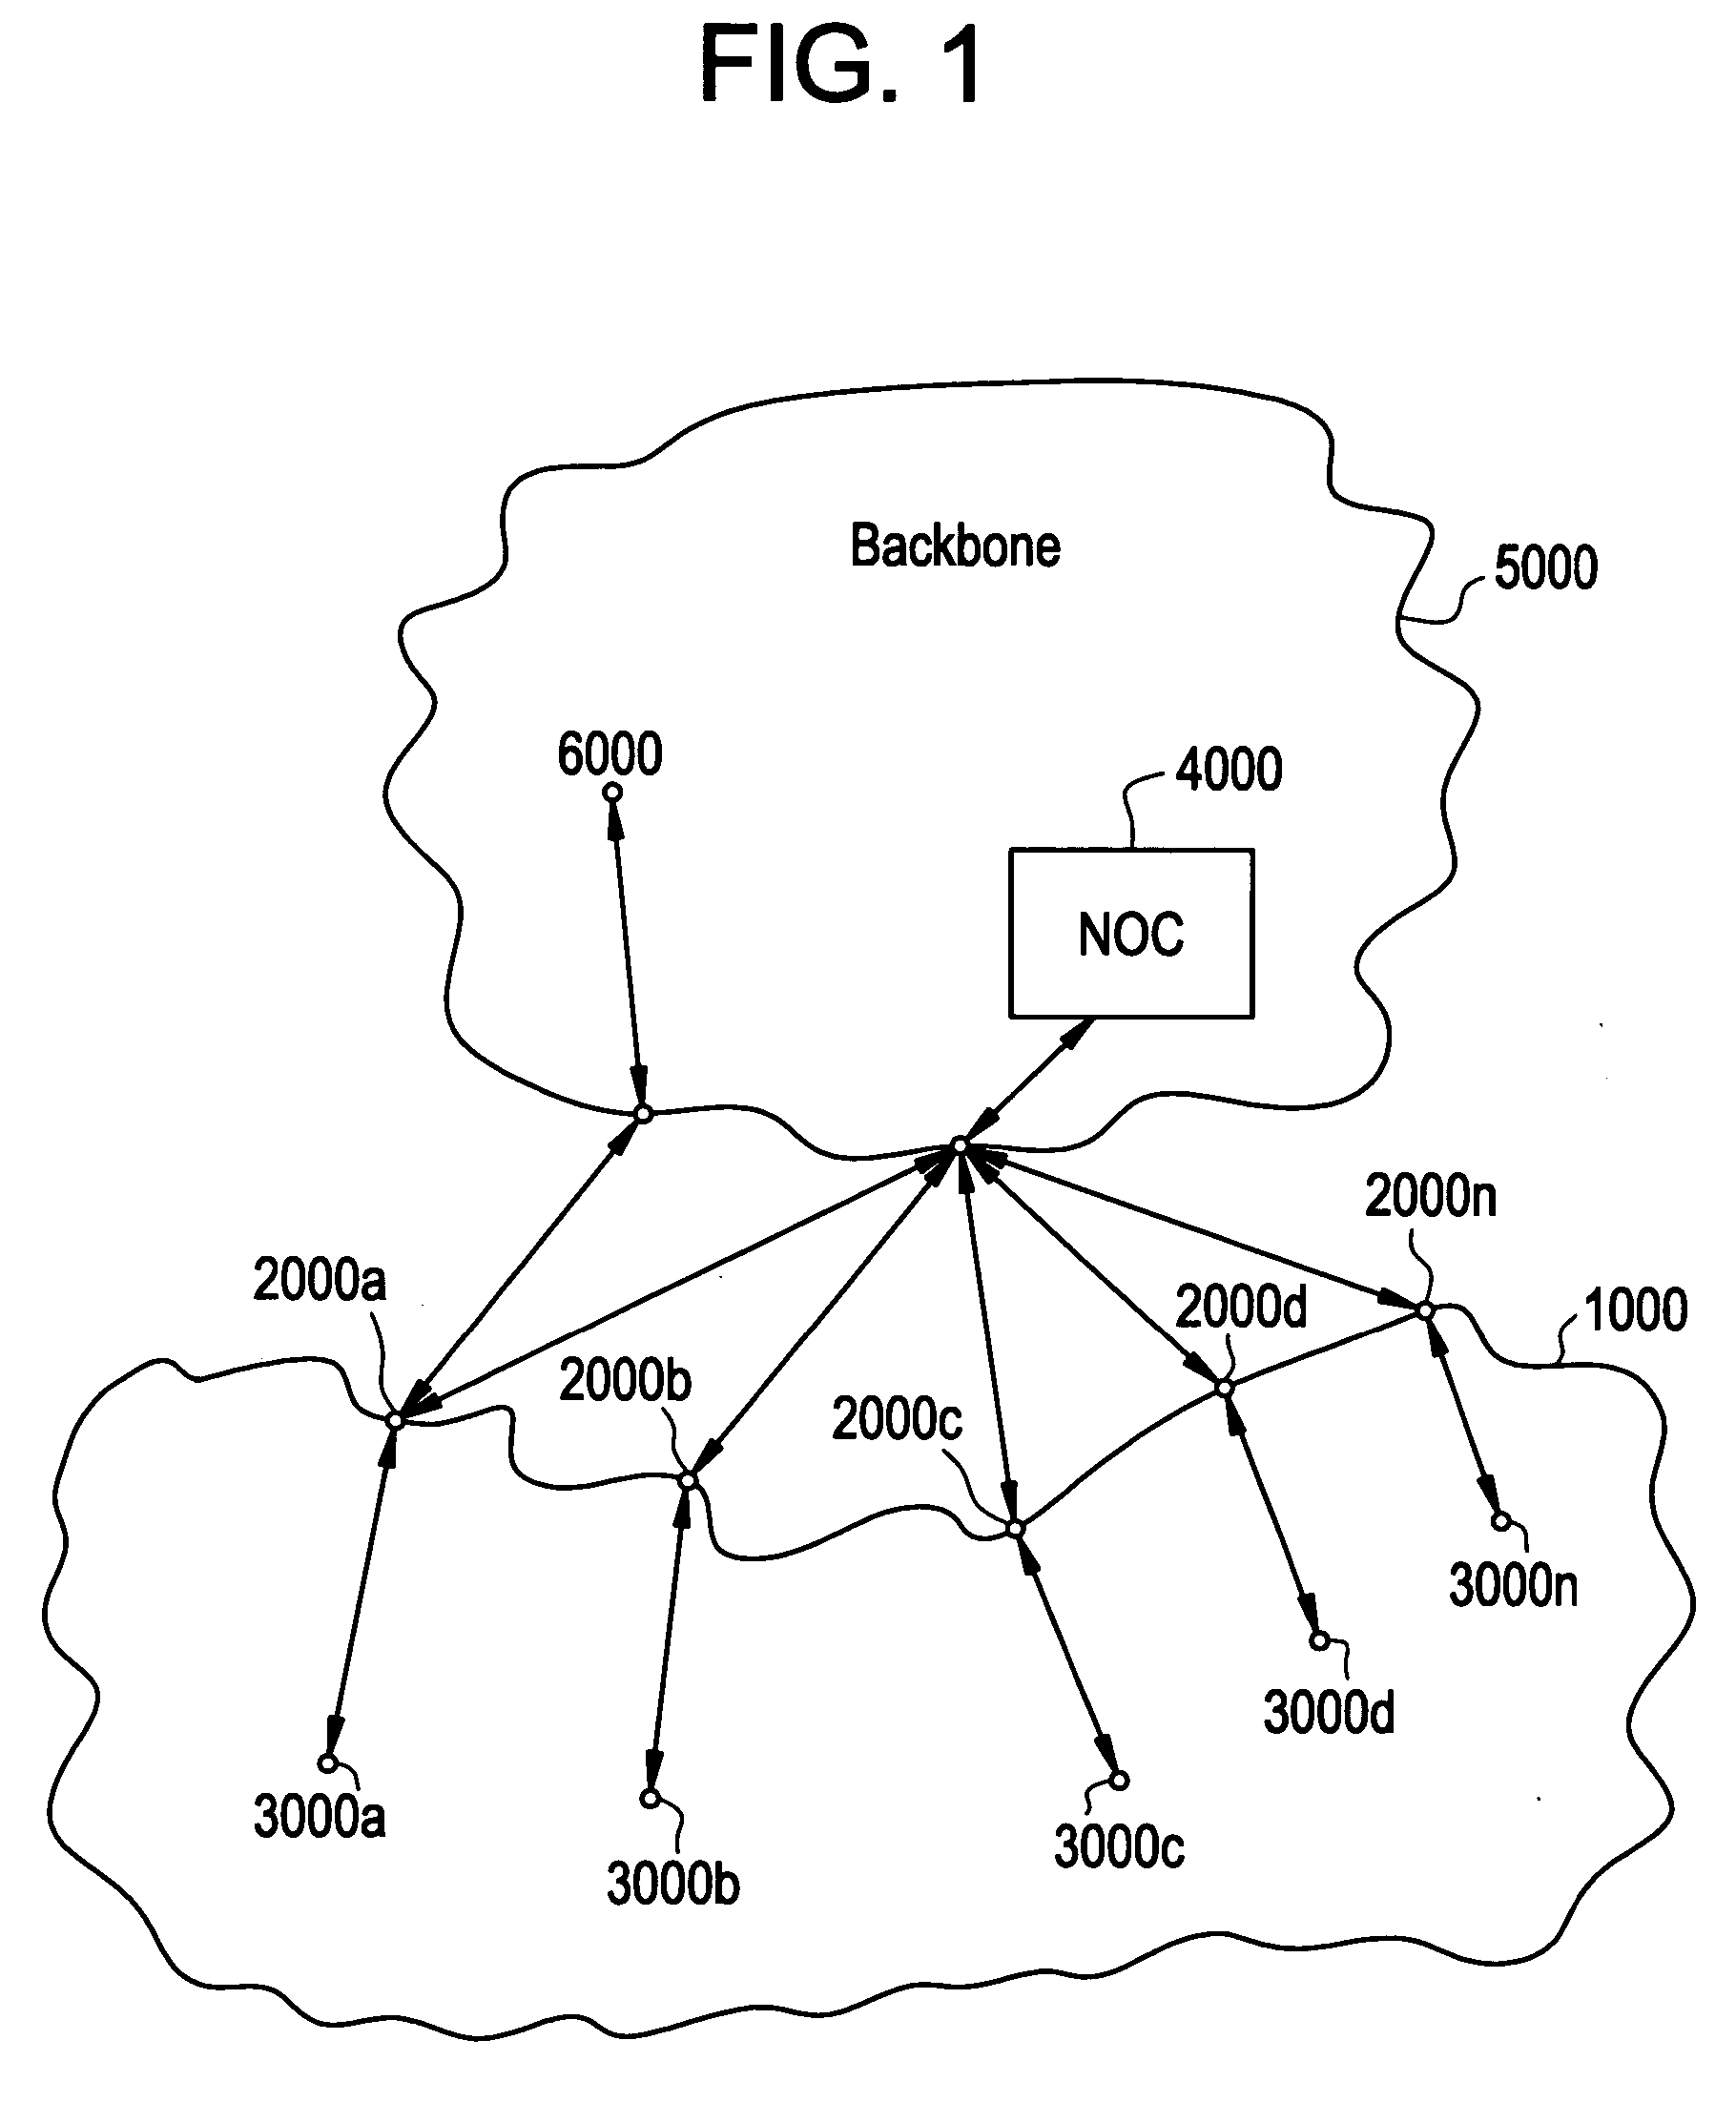 Methods and devices for scheduling the transmission of packets in configurable access wireless networks that provide Quality-of-Service guarantees